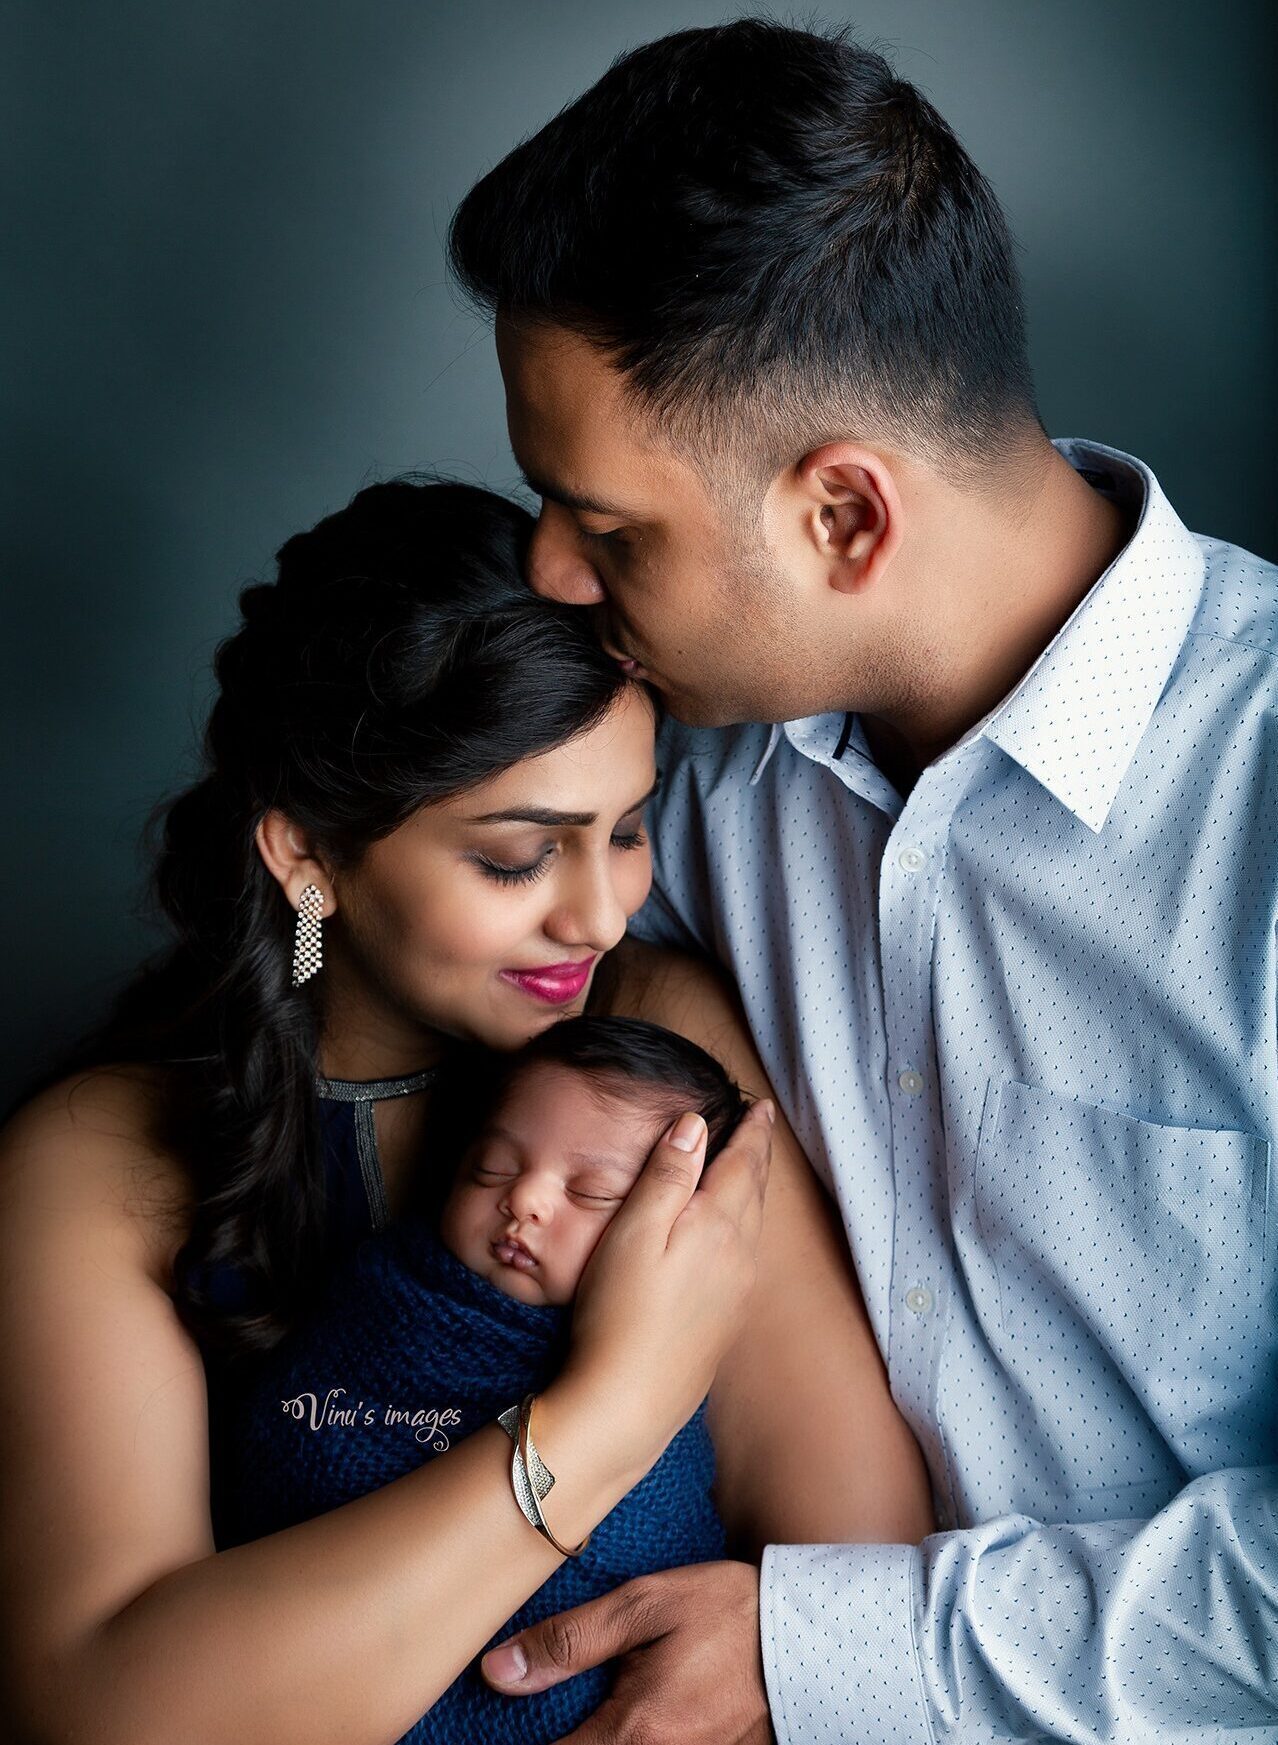 Cute family photoshoot with Newborn baby in Delhi, photography by Vinus Images